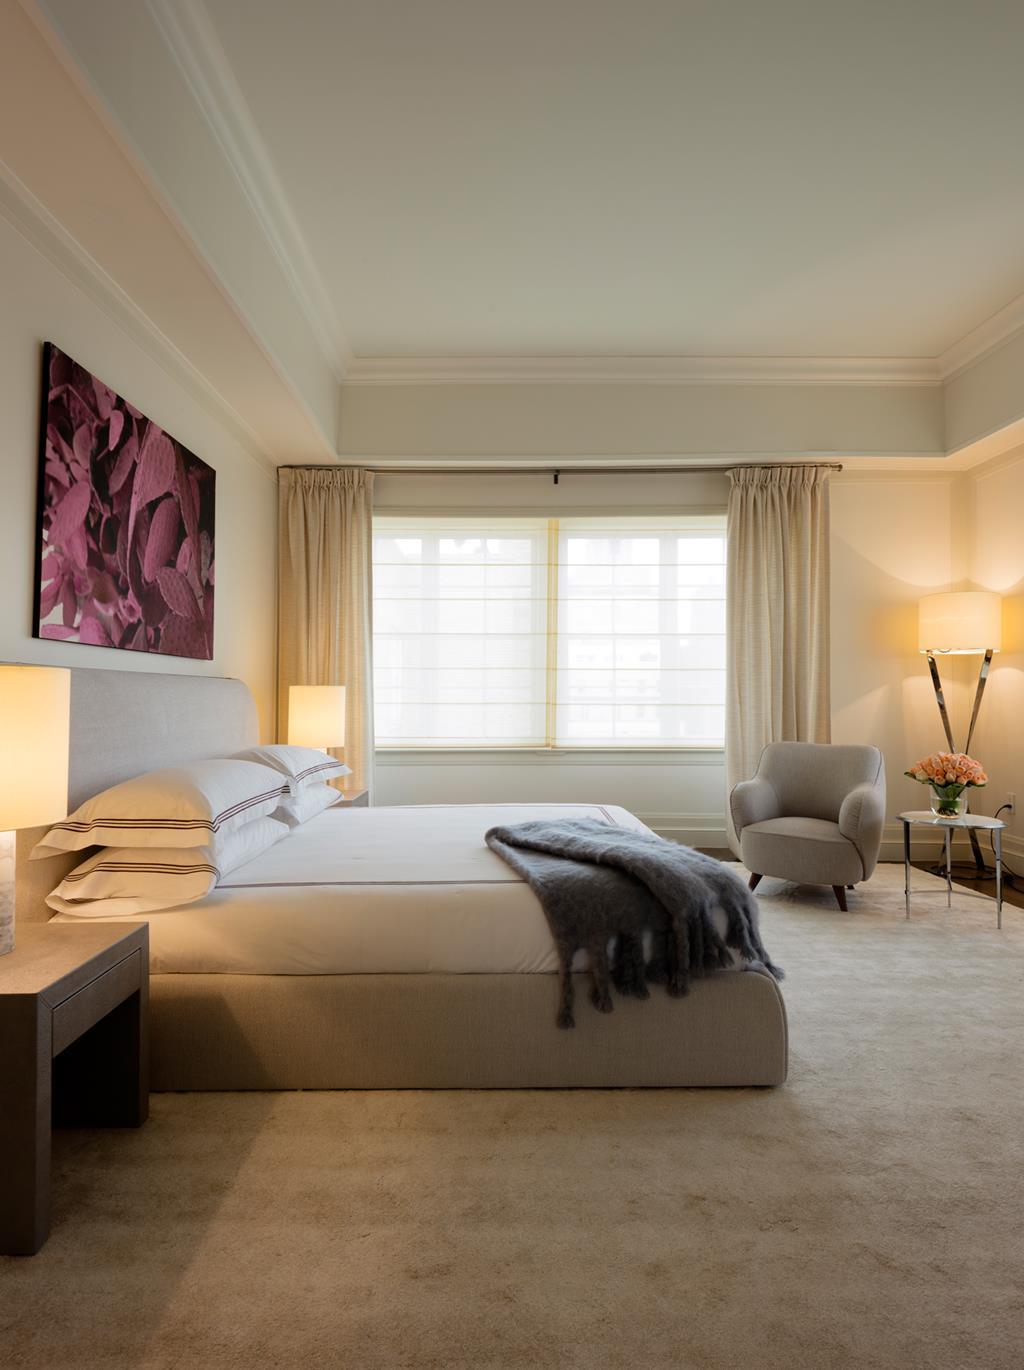 The Penthouse Suite's Master Bedroom